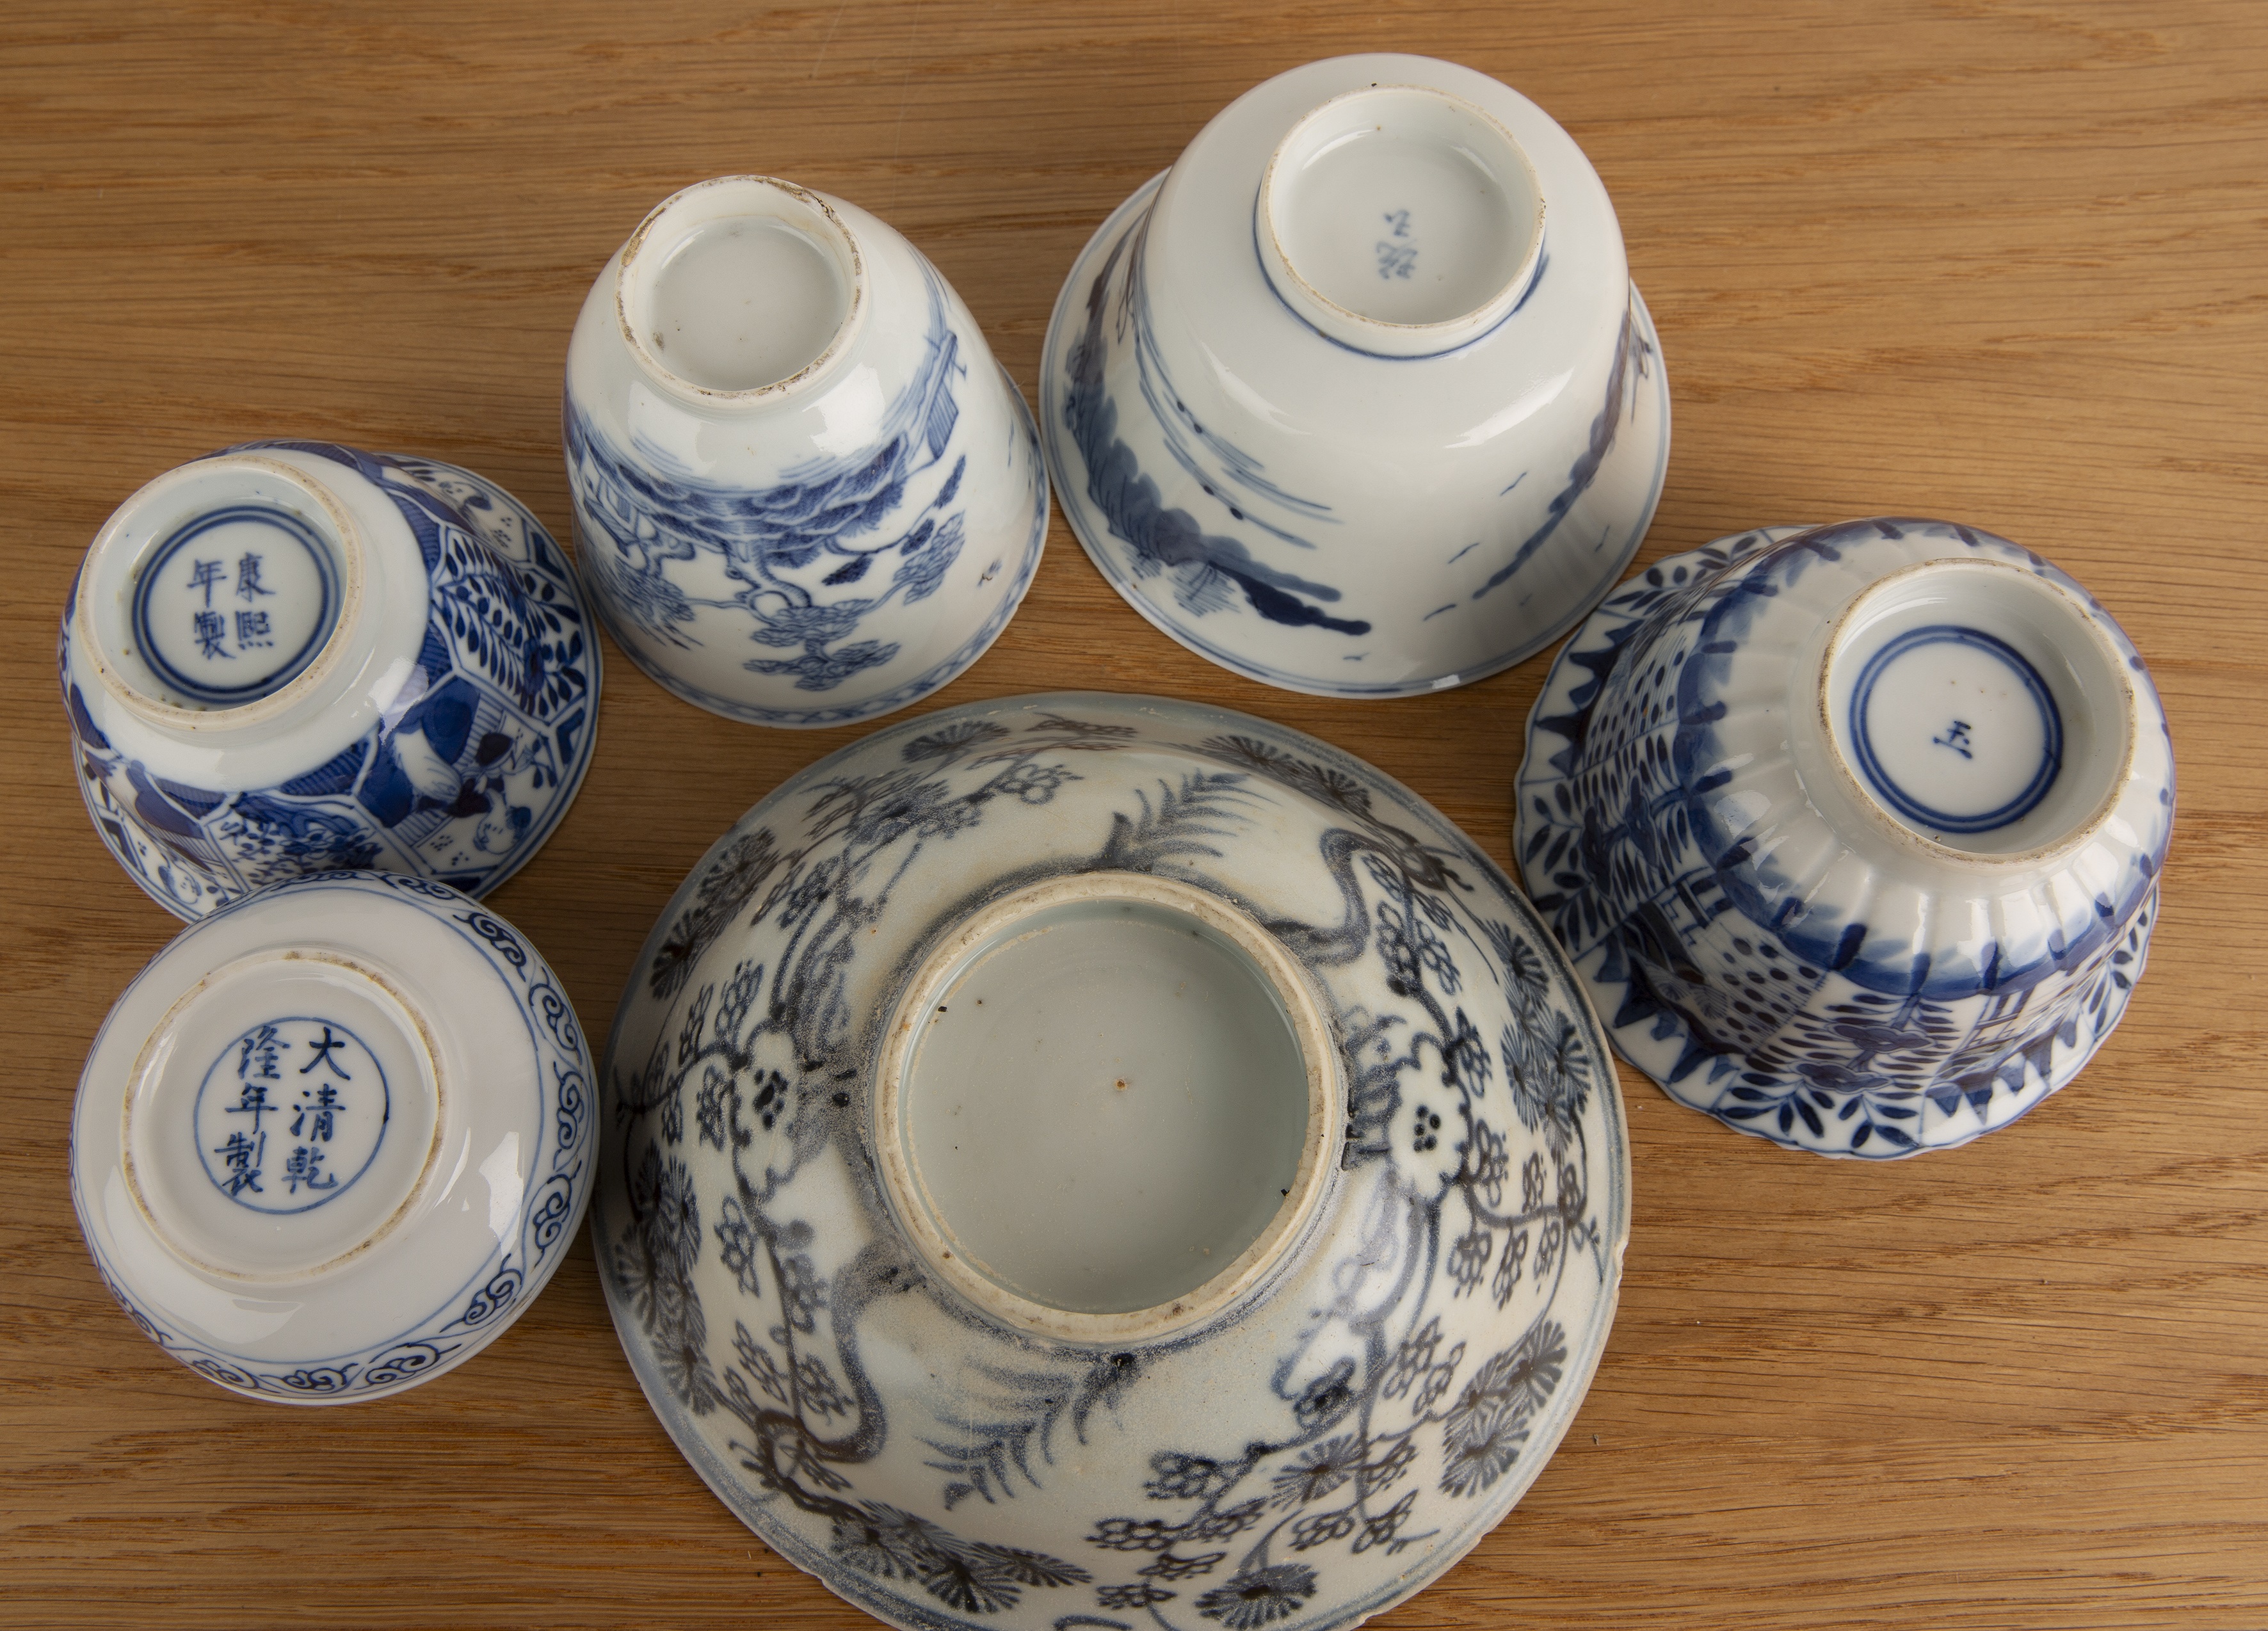 Group of blue and white porcelain Chinese and Japanese to include a tea bowl and saucer, painted - Image 4 of 6